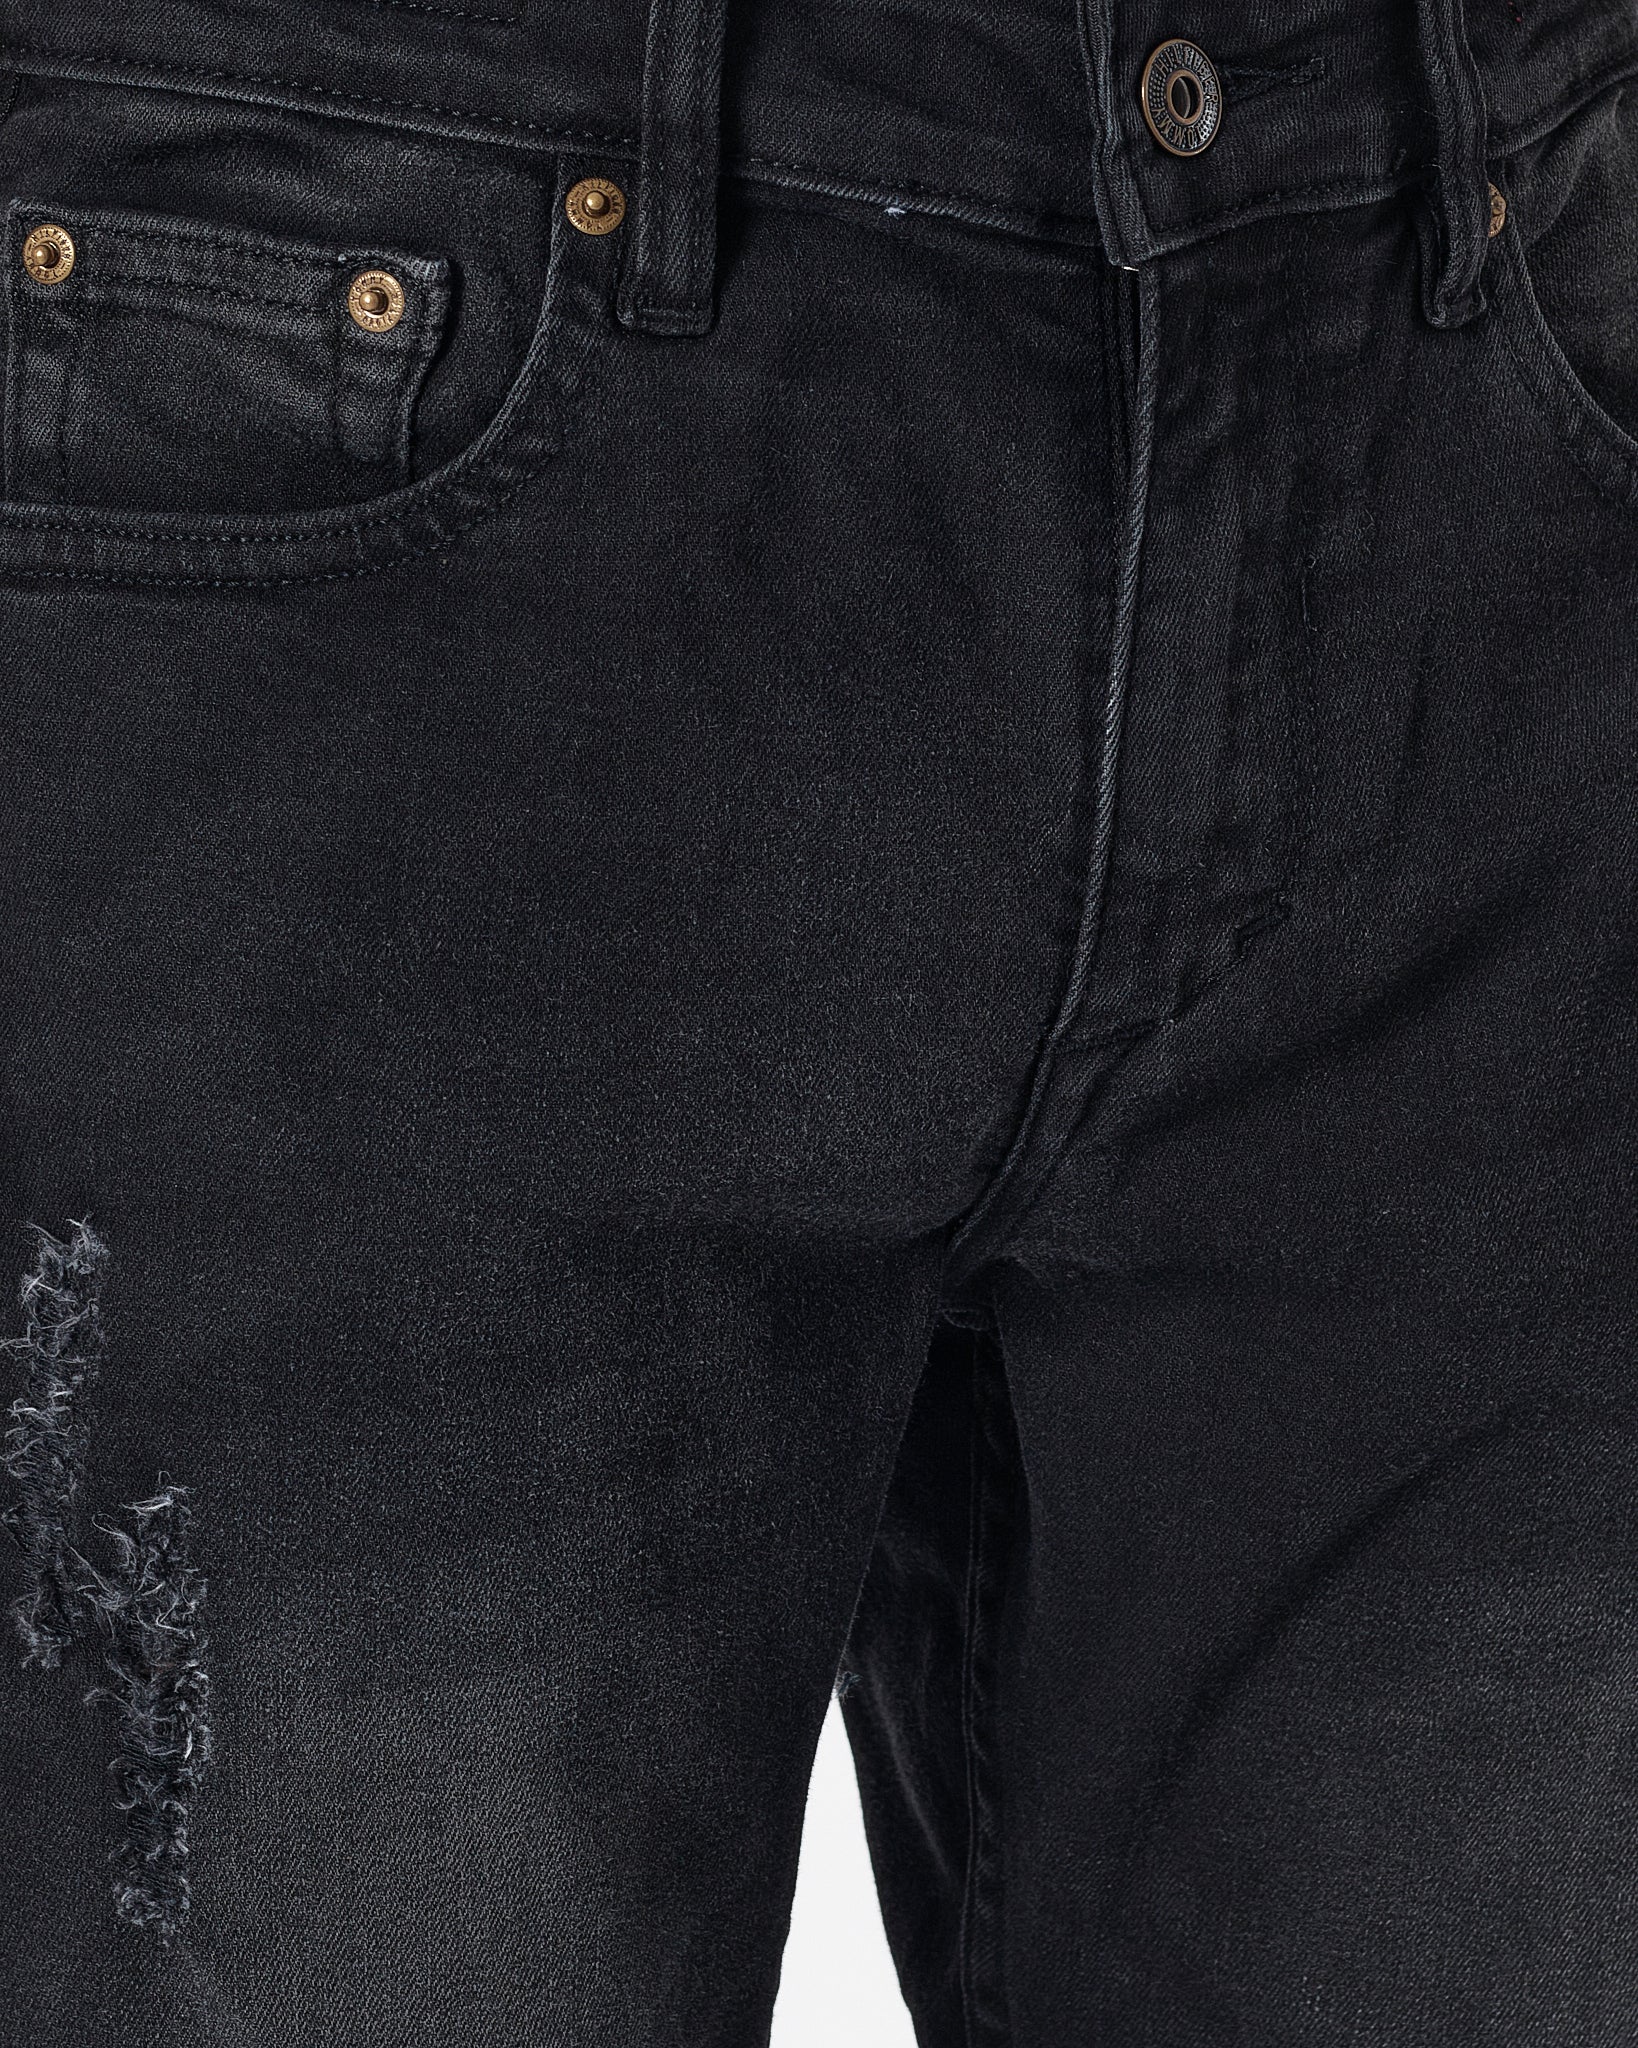 TH Distressed Men Charcoal Slim Fit Jeans 24.90